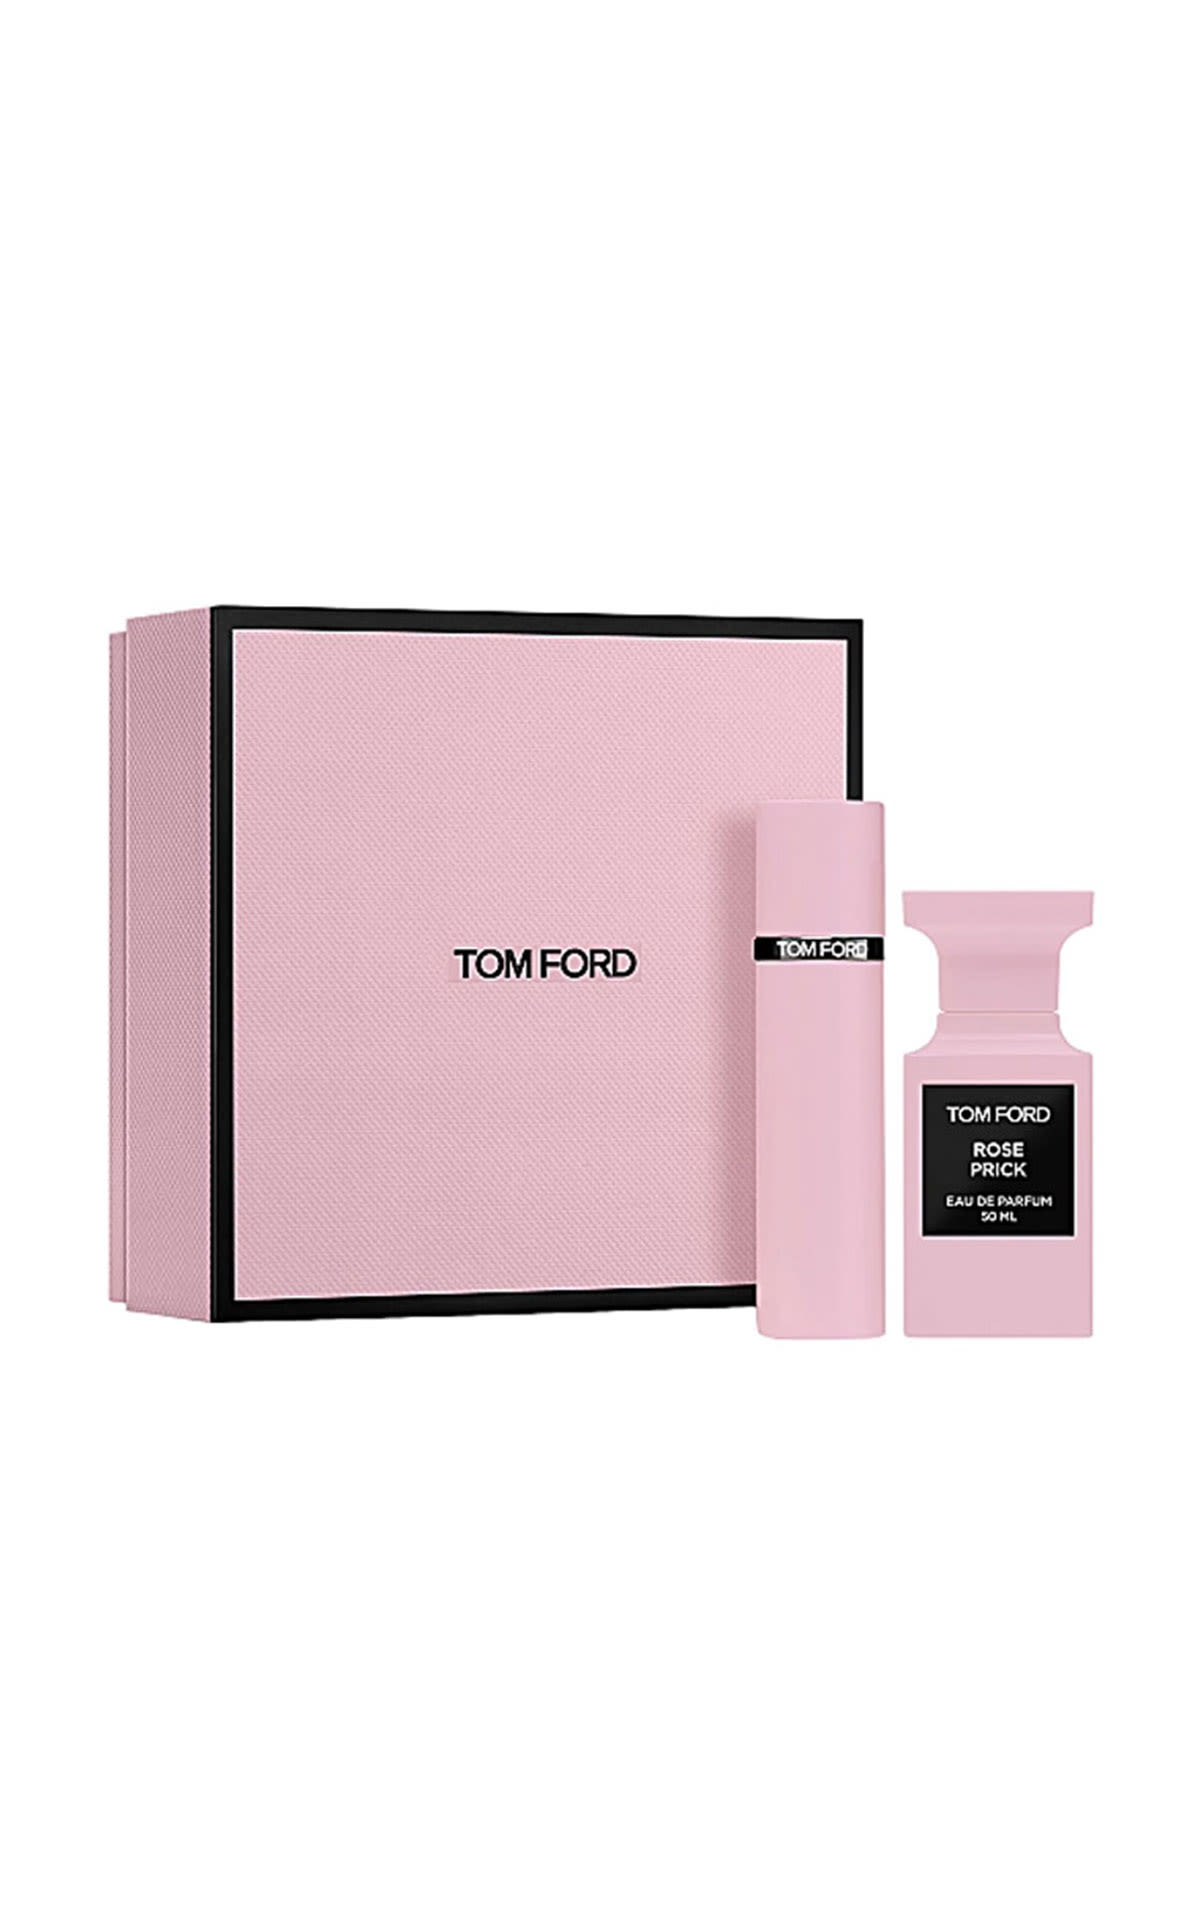 The Cosmetics Company Store Tom Ford Rose prick set from Bicester Village